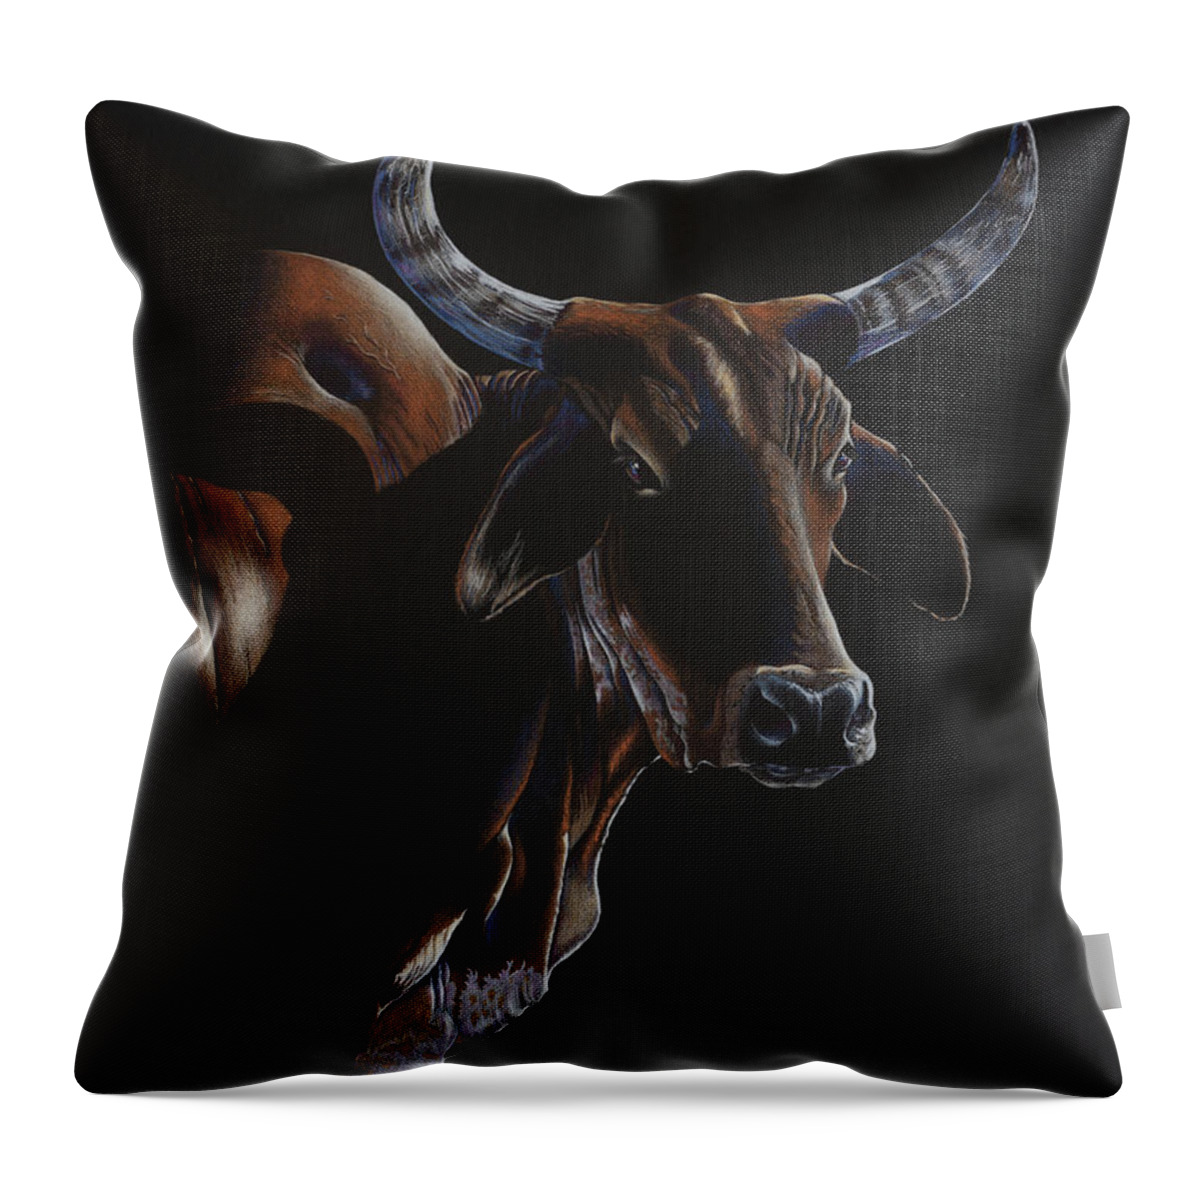 Brahma Throw Pillow featuring the drawing Jeremiah by Jill Westbrook